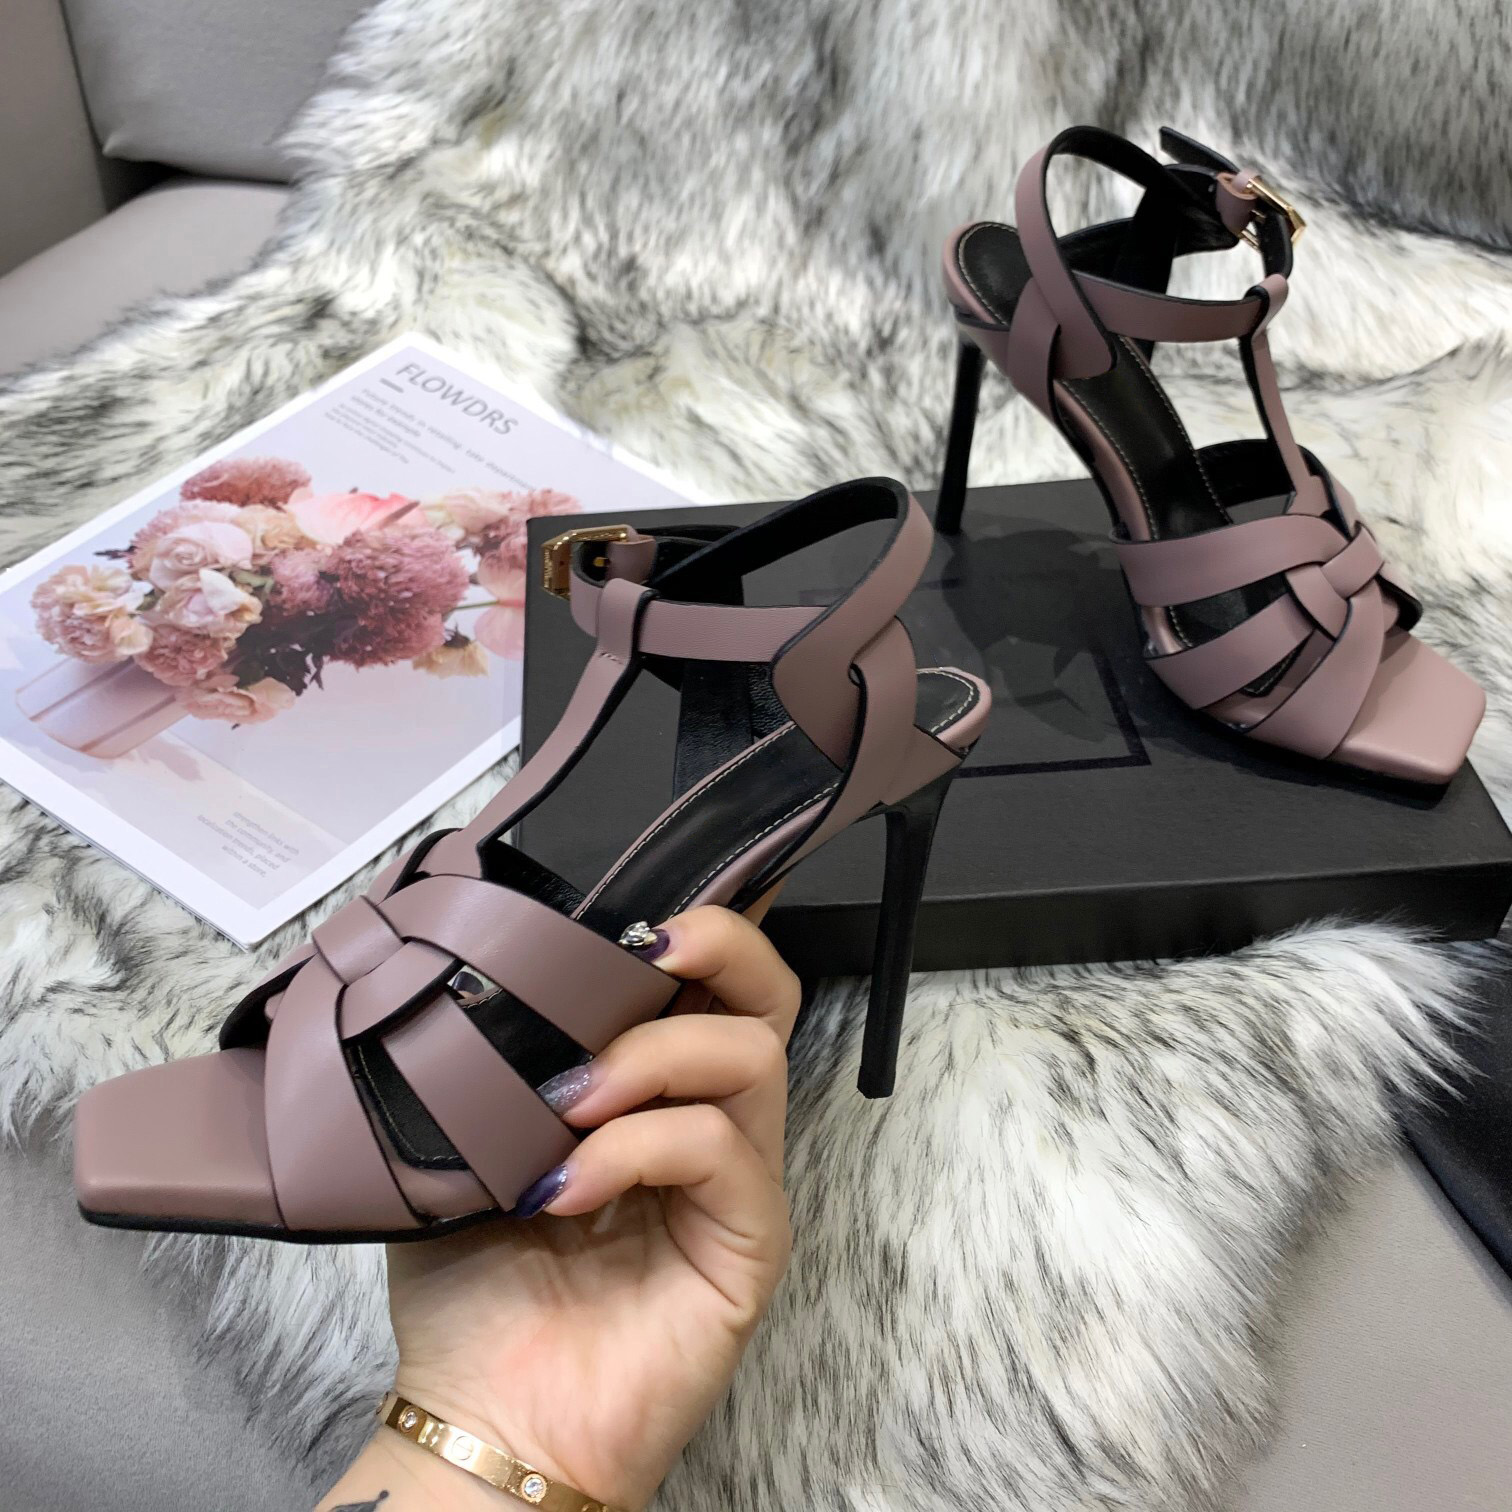 

Top Quality 10mm Tribute stiletto Heels Sandals nude smooth leather super high heel for women luxury designers shoes party heeled sandal factory footwear, Gift(not sold separately)